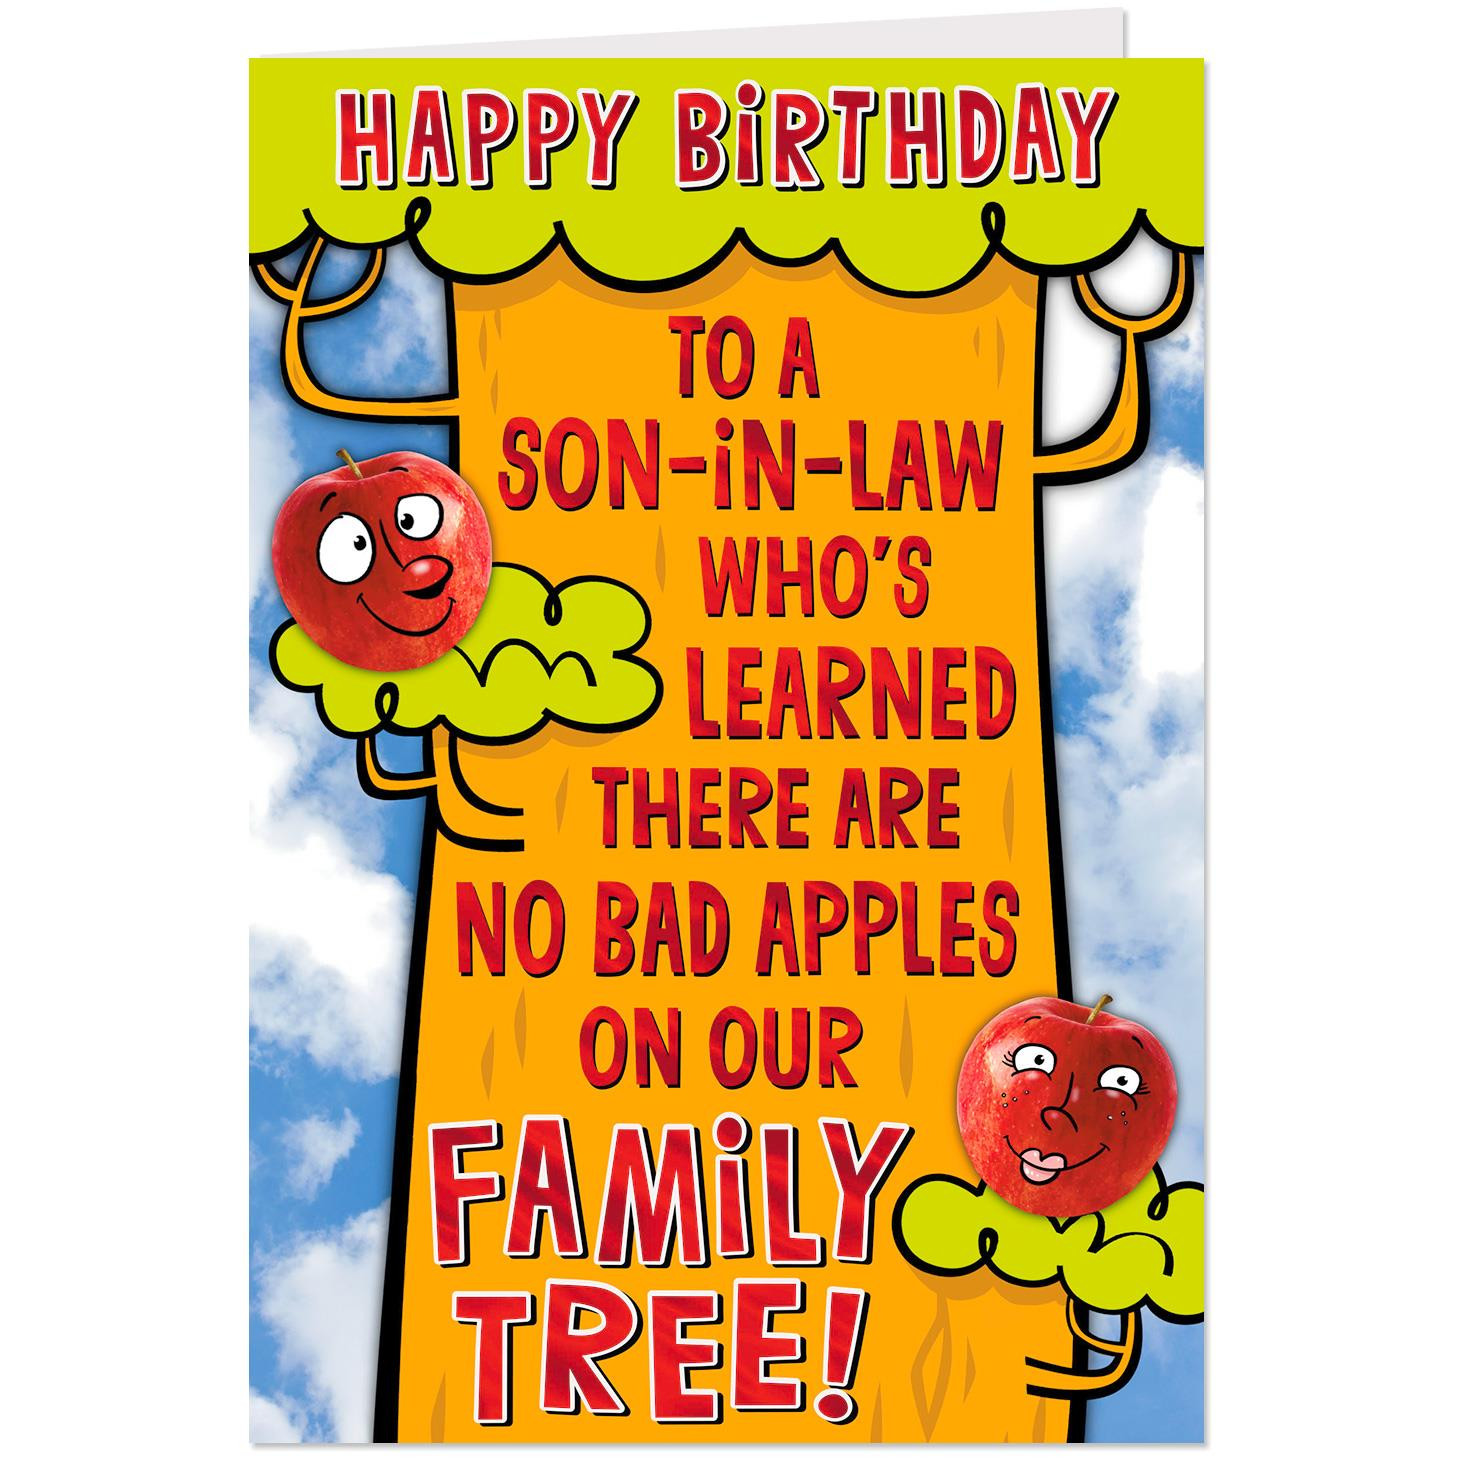 Funny Birthday Cards For Son
 Just a Few Nuts Funny Pop Up Birthday Card for Son in Law